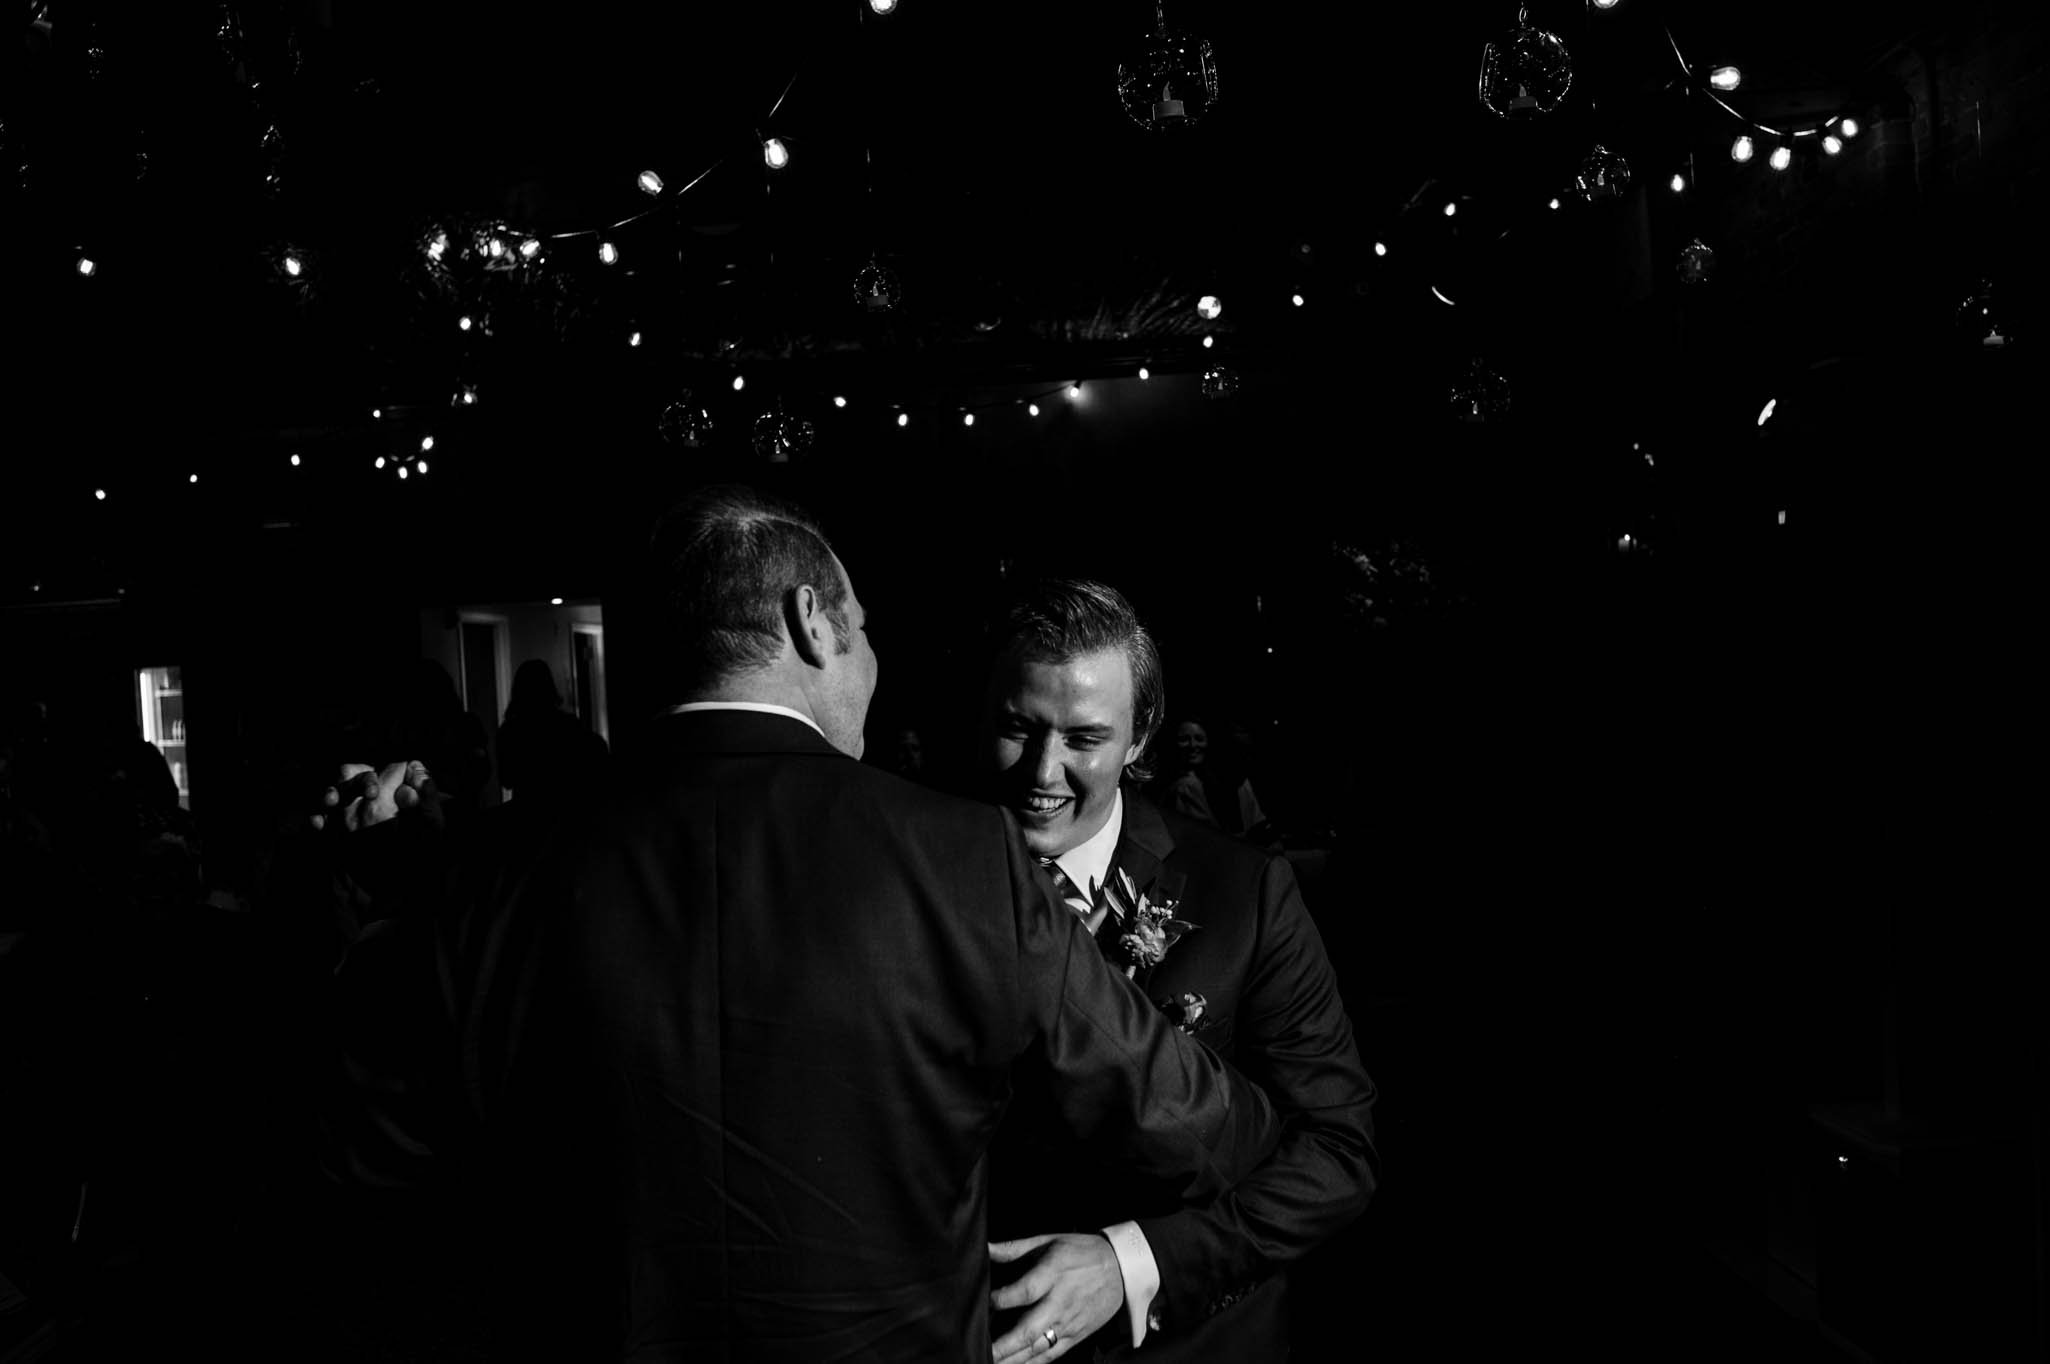 two grooms share their first dance at their wedding